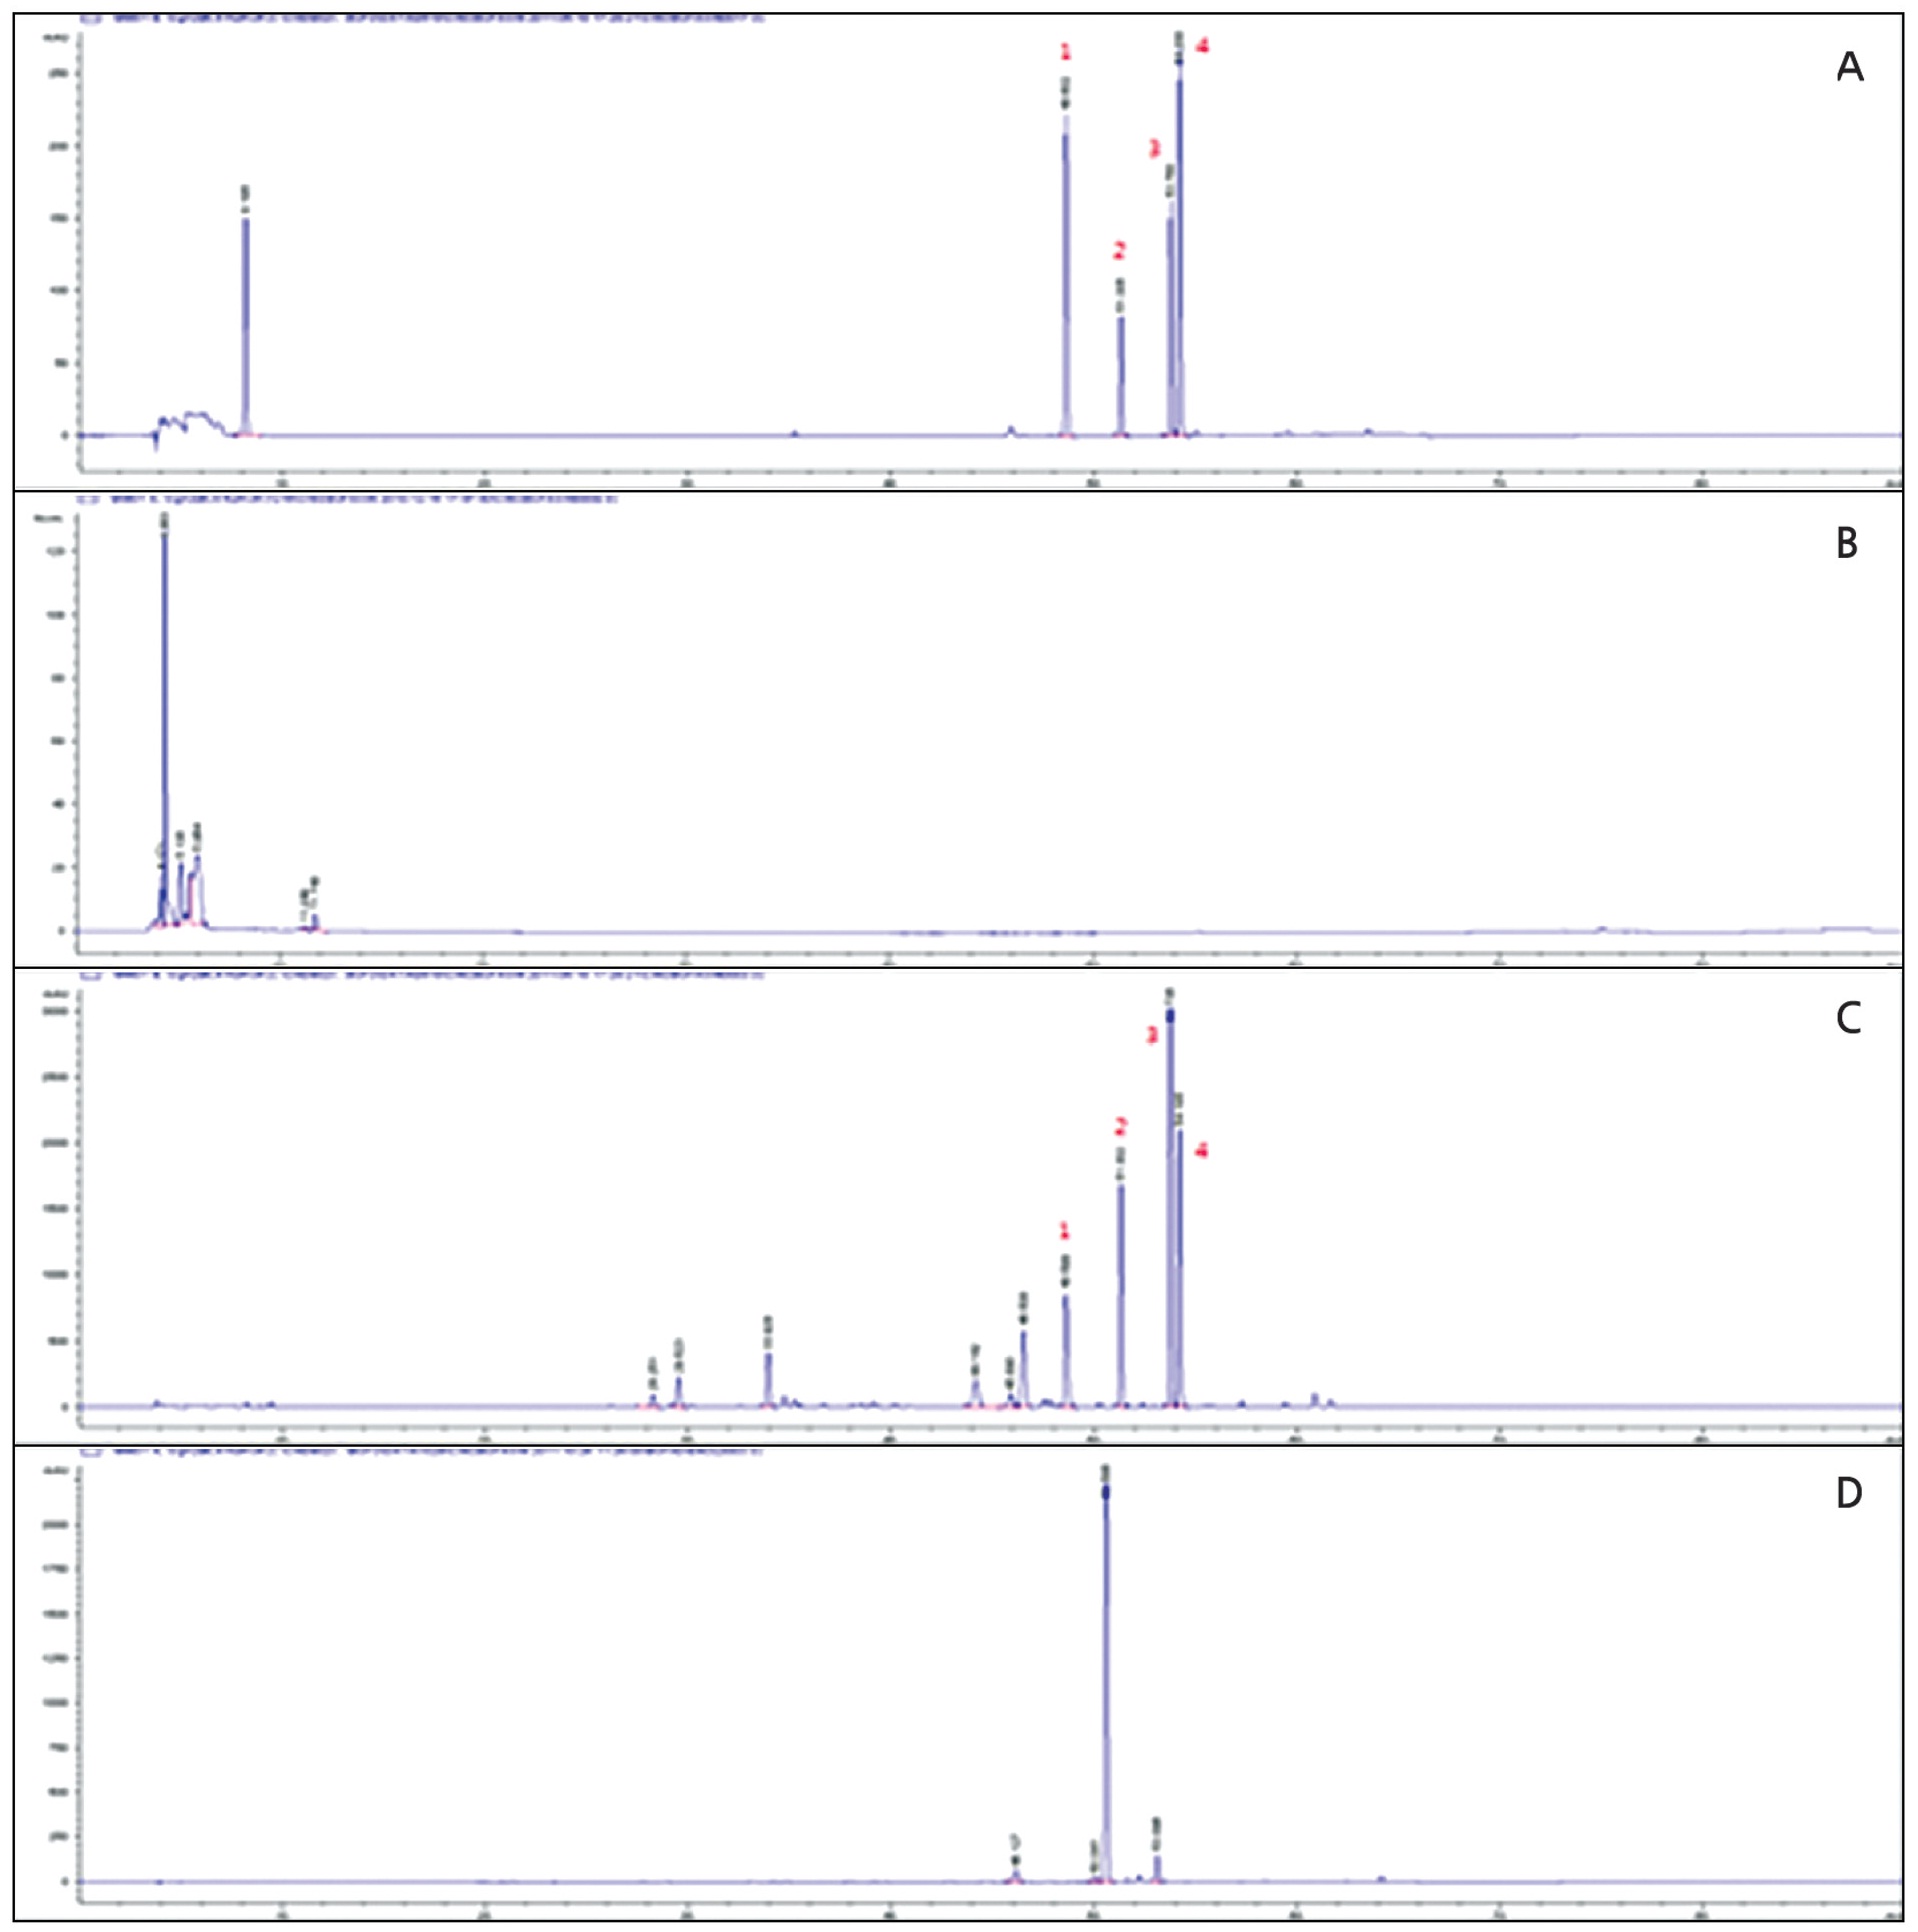 HPLC chromatograms of Venenum Bufonis (A: standard mix, B: water extract, C: EtOH extract, D: isolation of bufalin).